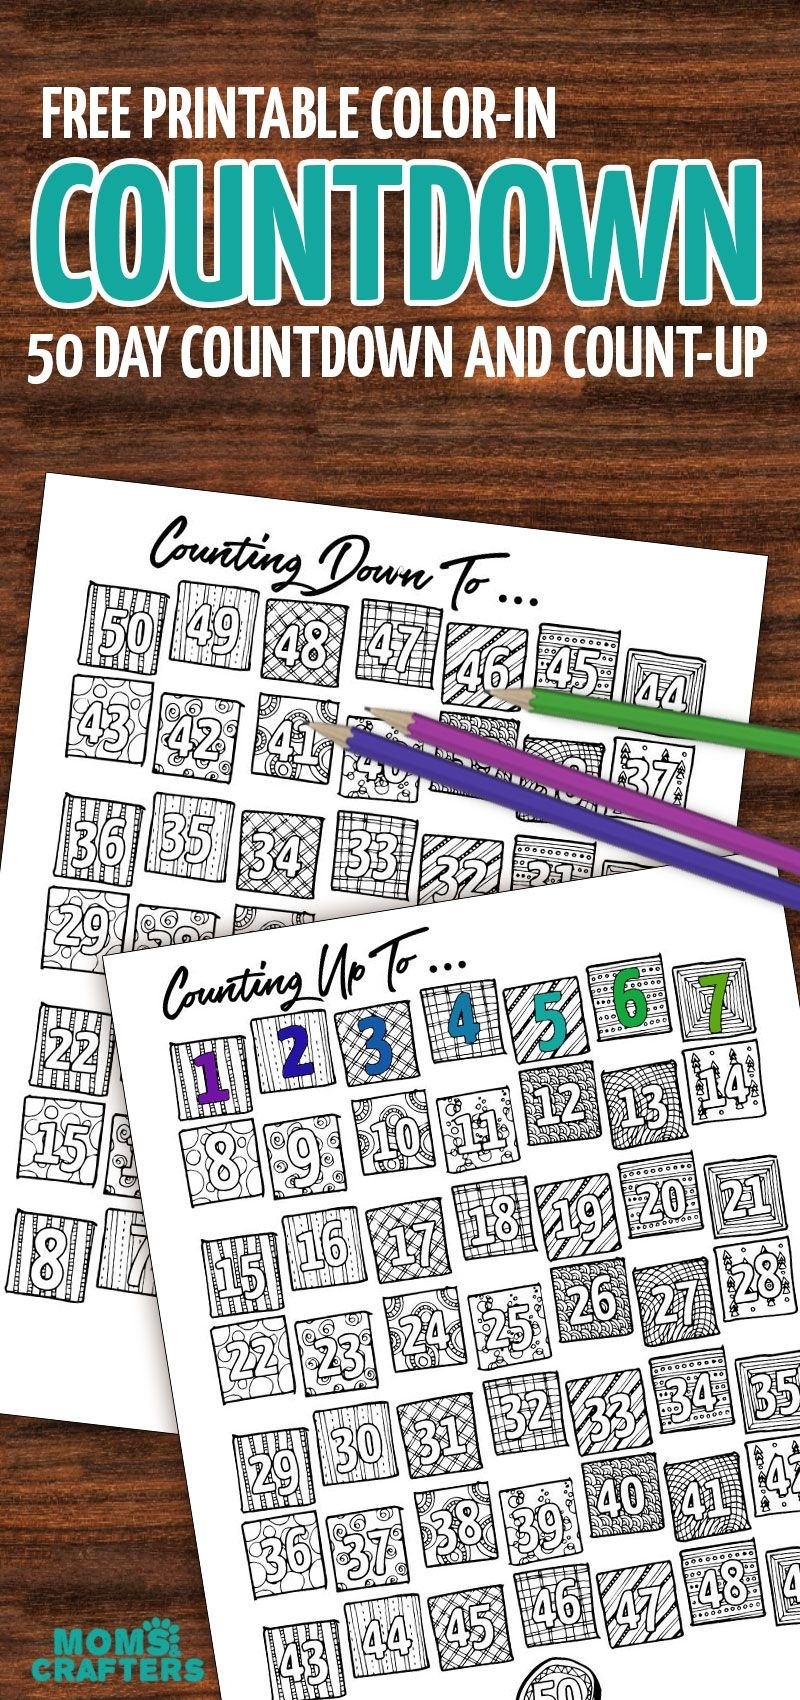 Grab This Fun Color-In Countdown And Progress Tracker Exceptional Free Printable Countdown Calendar Days